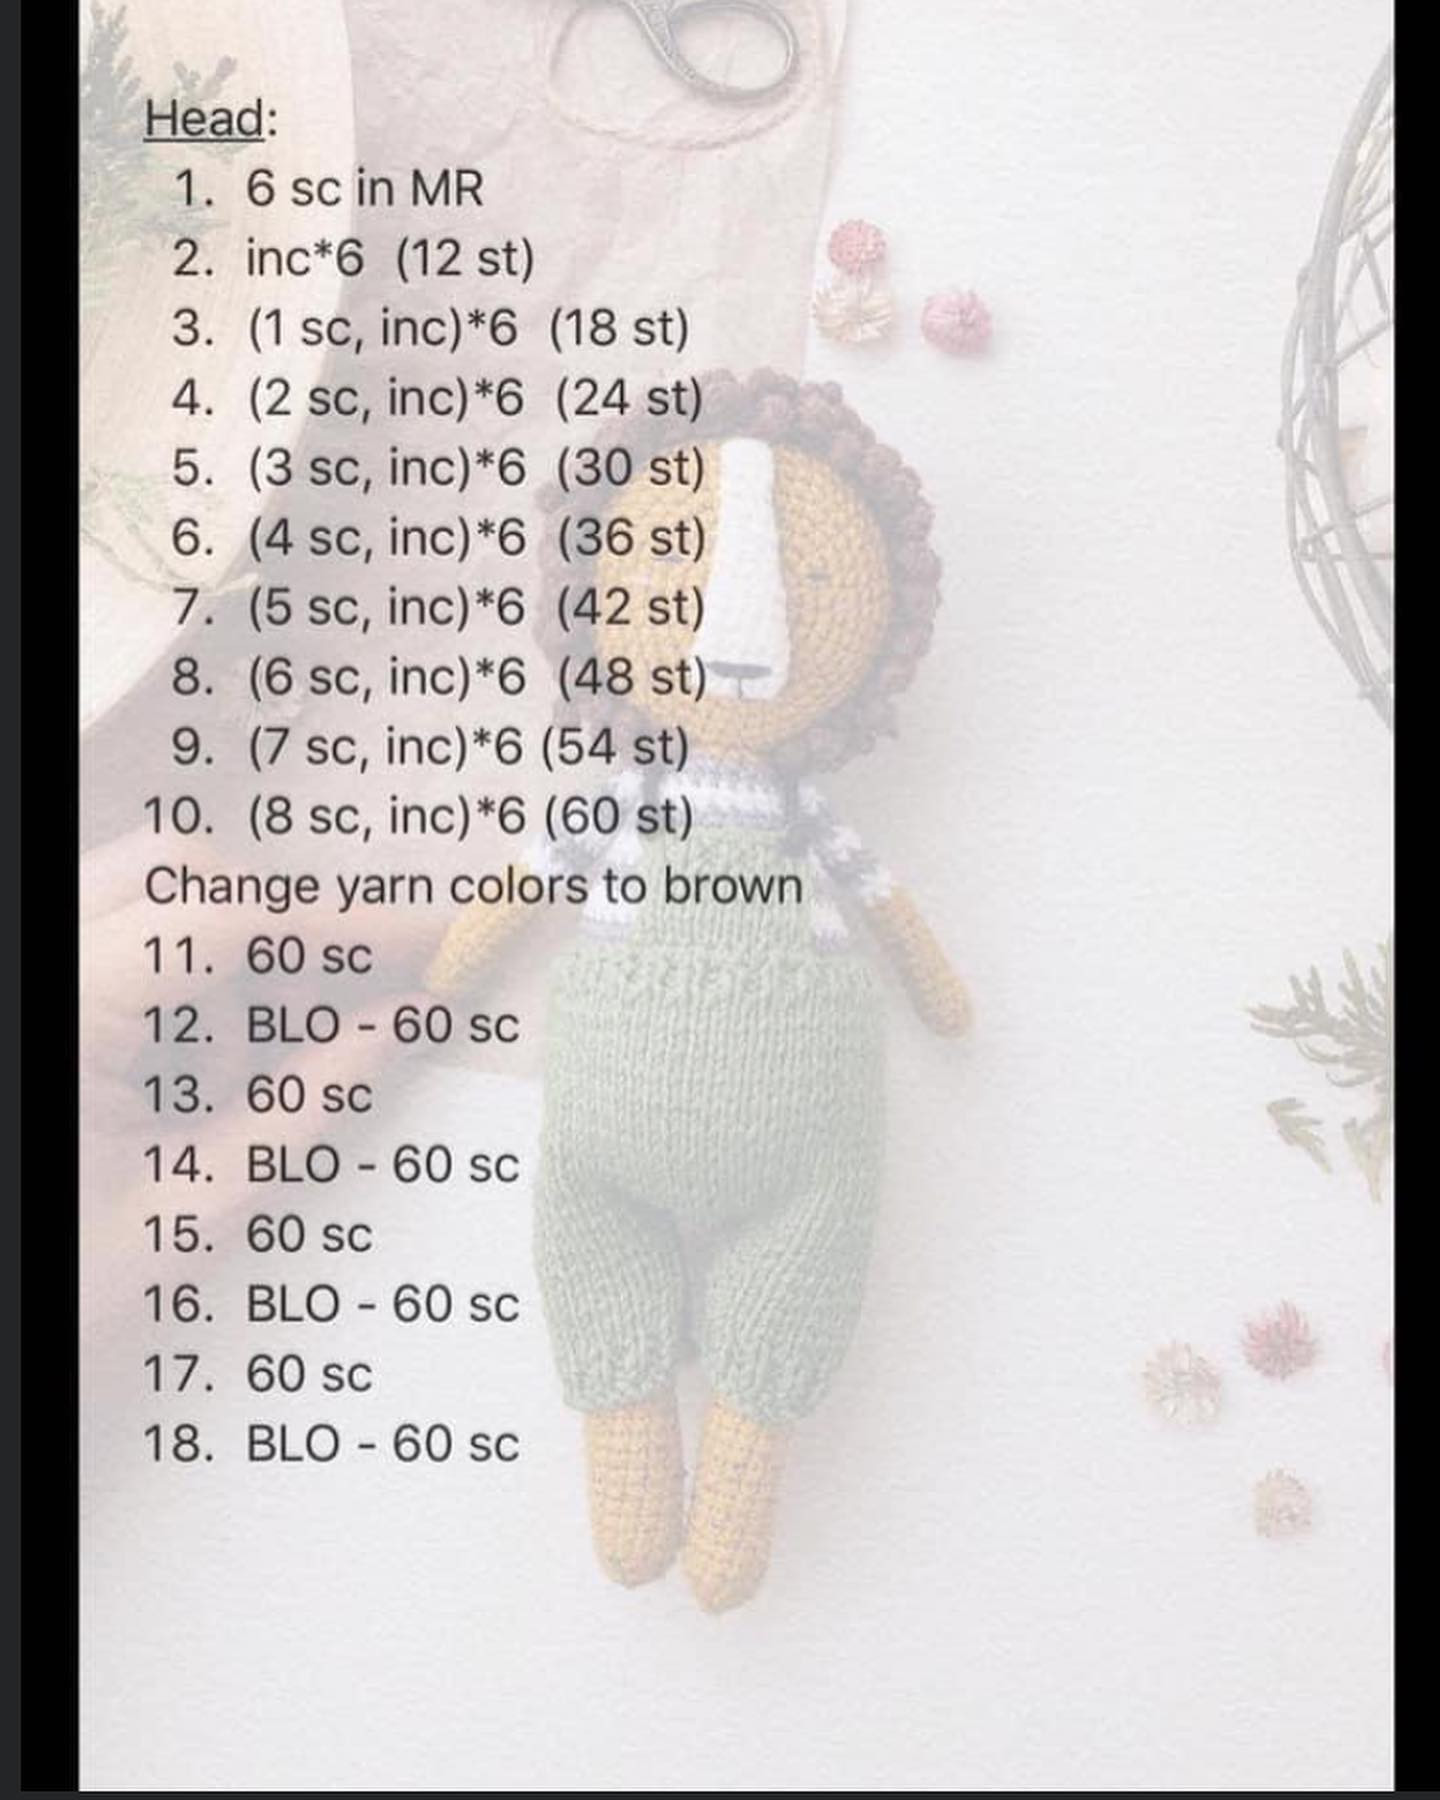 The bear crochet pattern wears blue overalls and a brown hat.